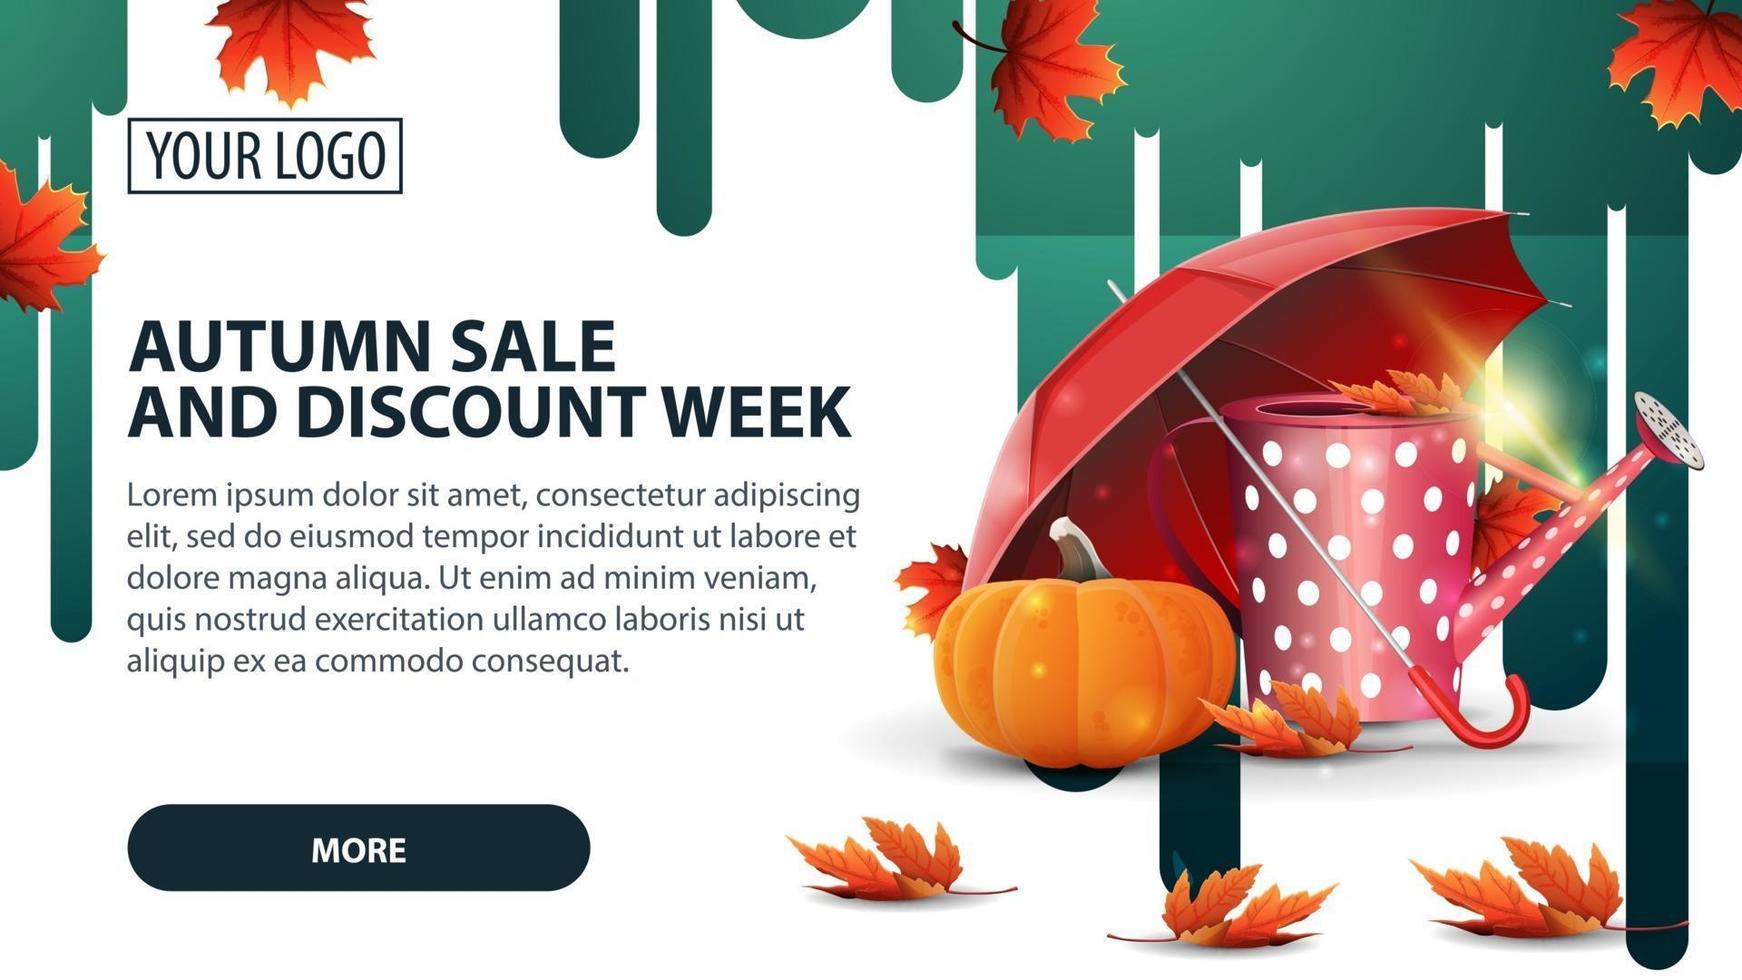 Autumn sale and discount week, banner with garden watering can vector